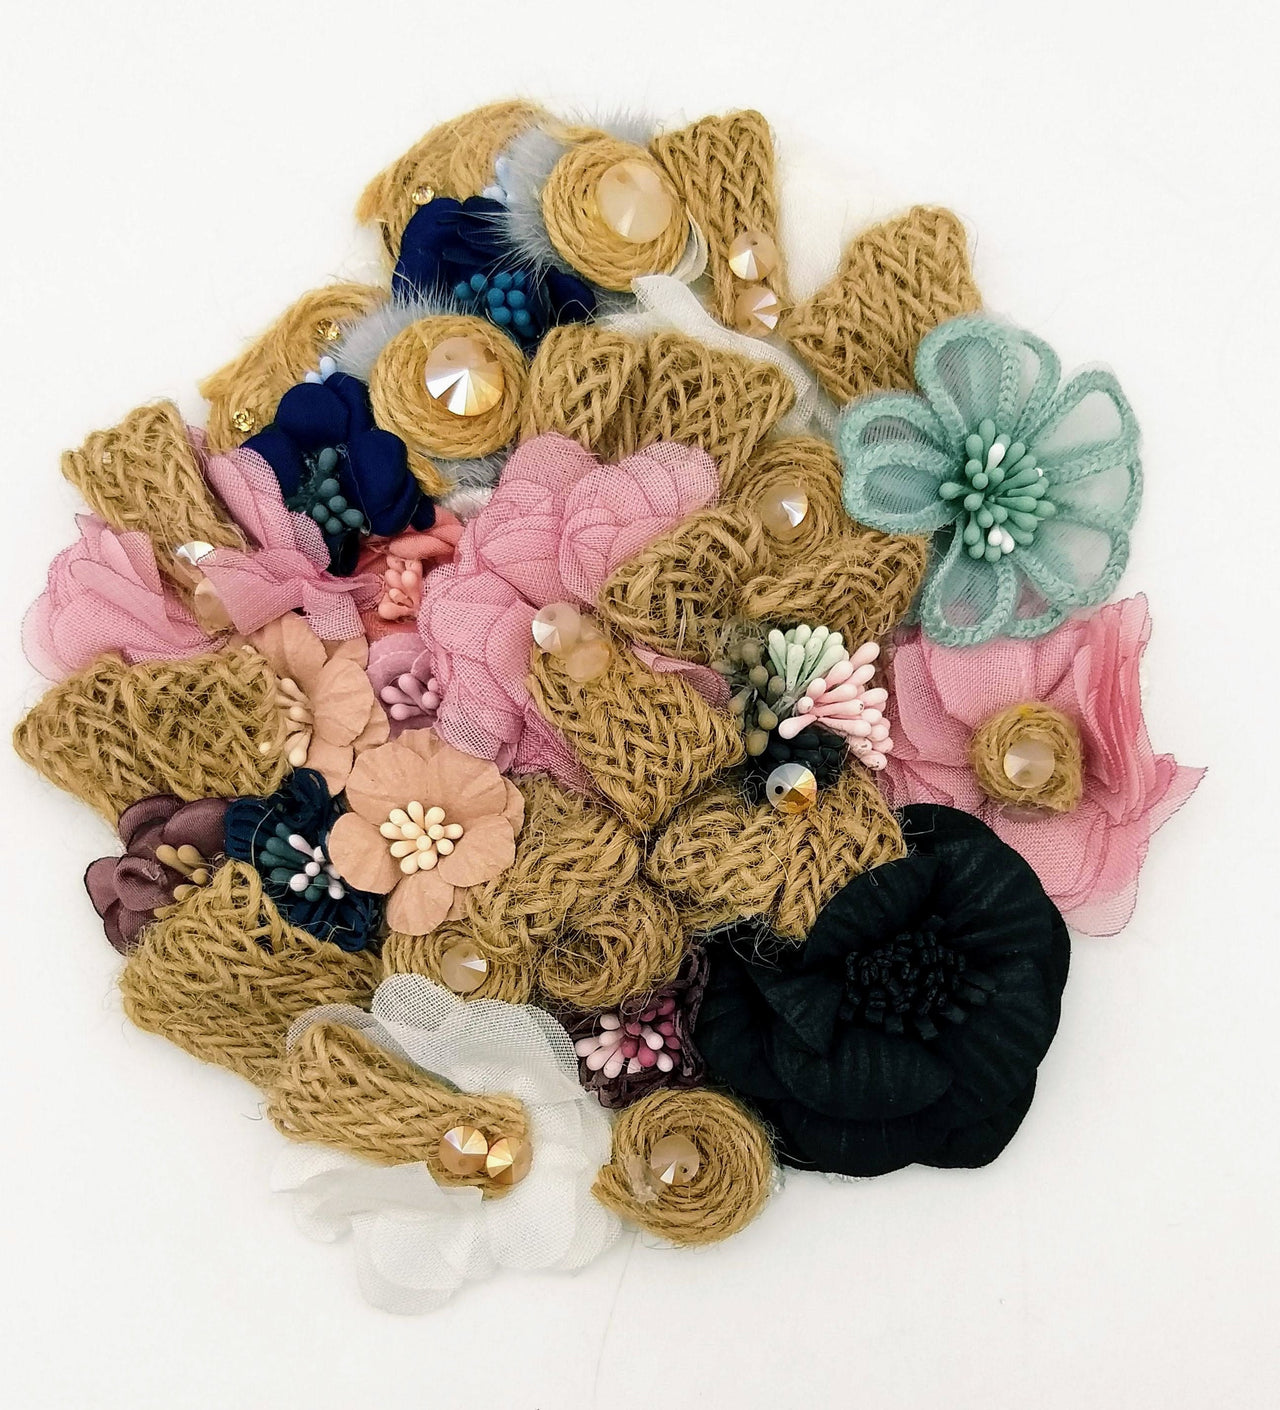 Handcrafted Jute Floral Applique in Pink, Black, Navy Blue and Teal Blue